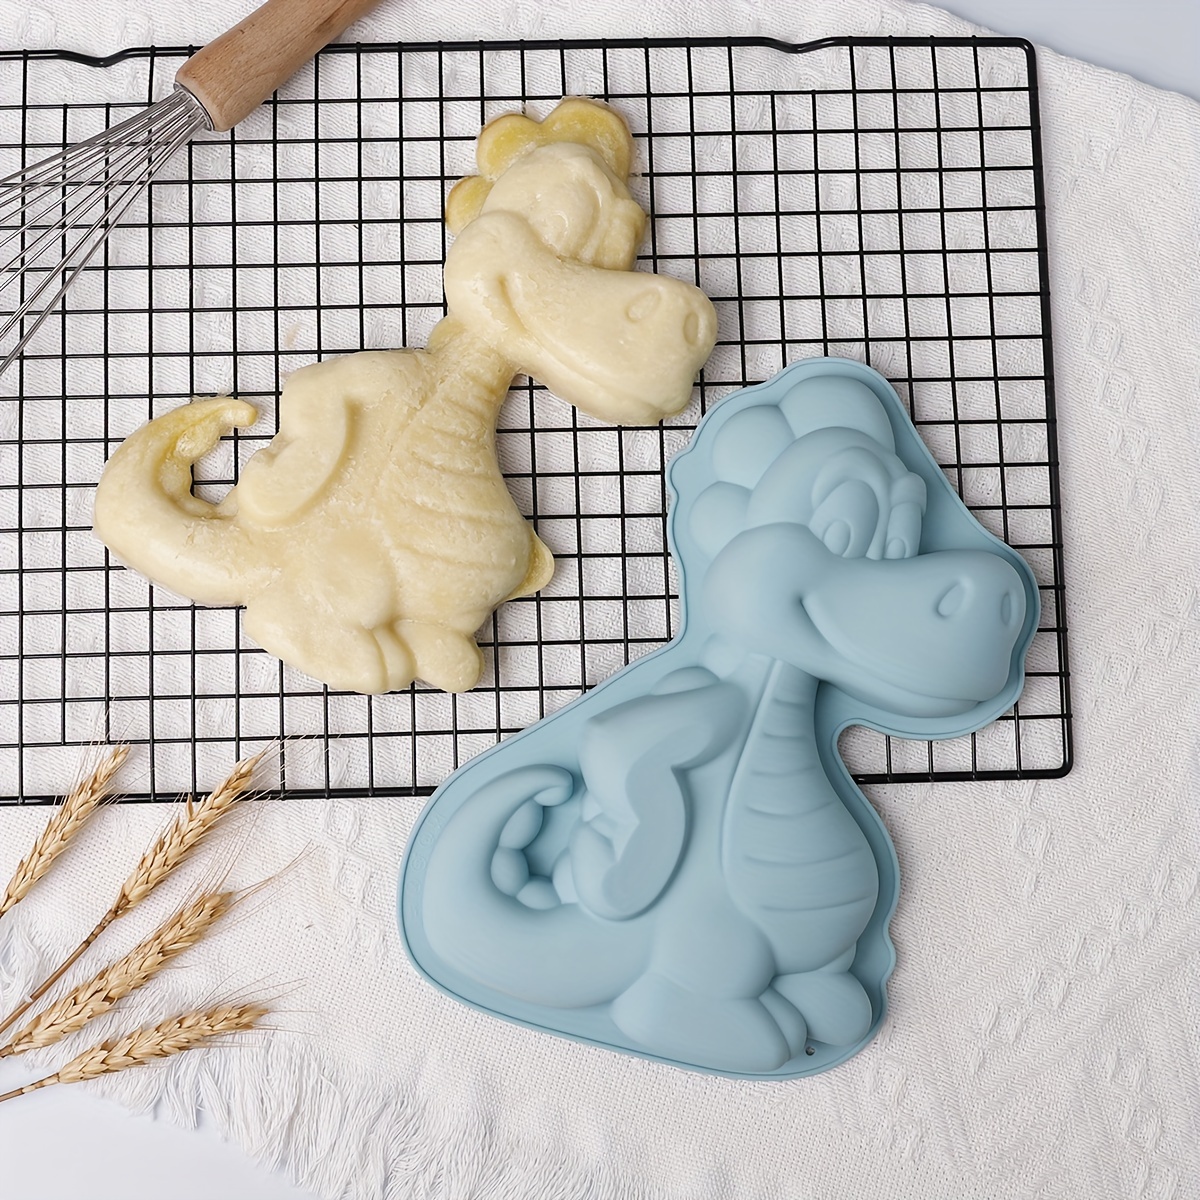 

1pc, Dinosaur Shaped Silicone Cake Pan, Baking Cake Mold, Baking Pan, Oven Accessories, Baking Tools, Kitchen Gadgets, Kitchen Accessories